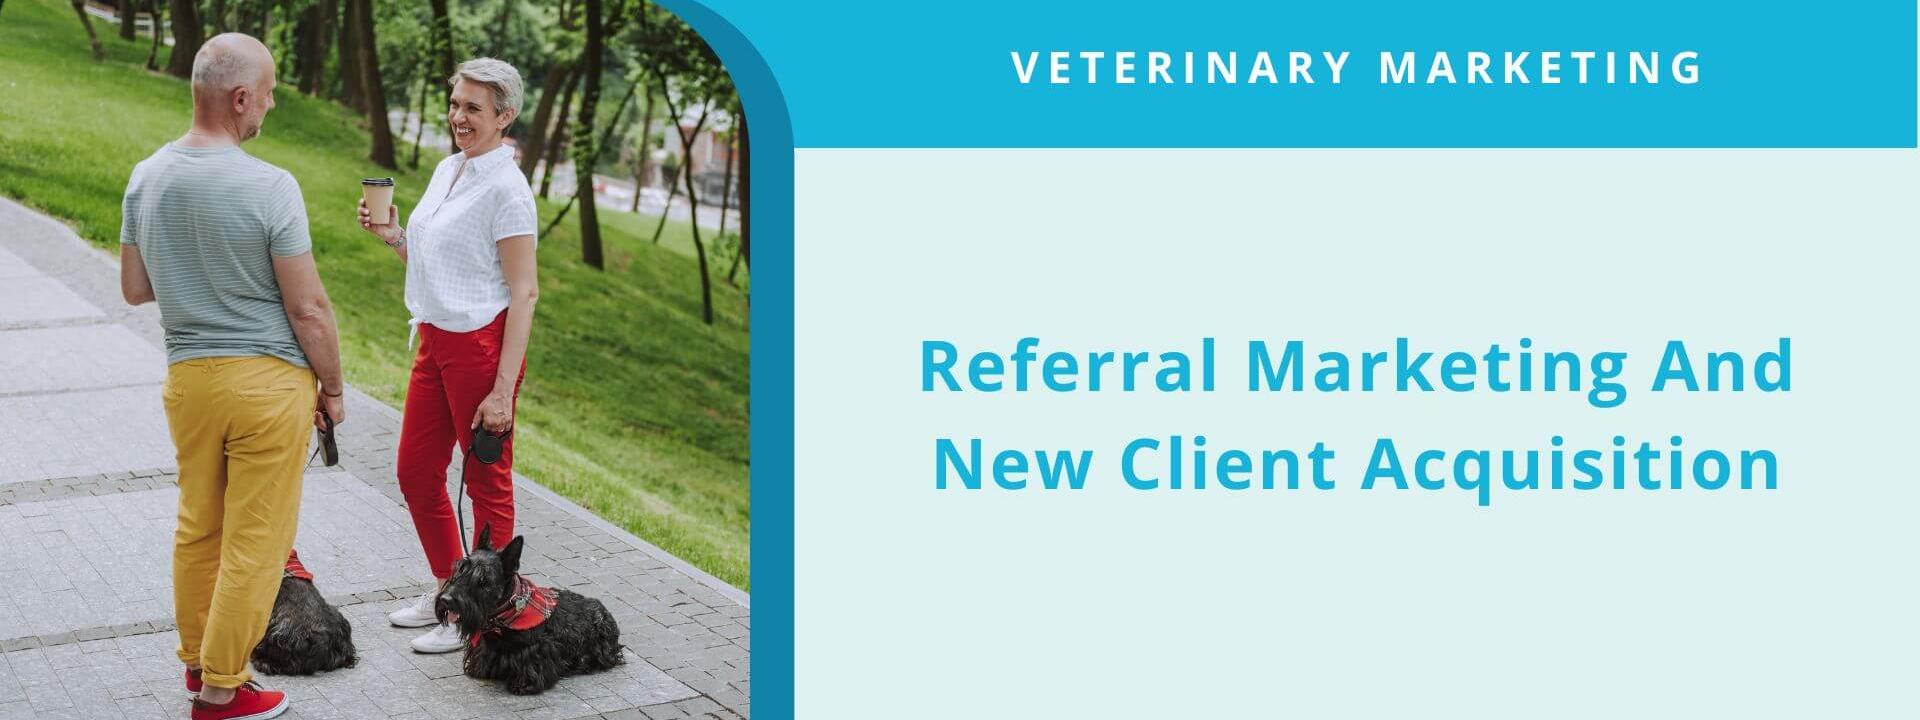 Referral Marketing And New Client Acquisition